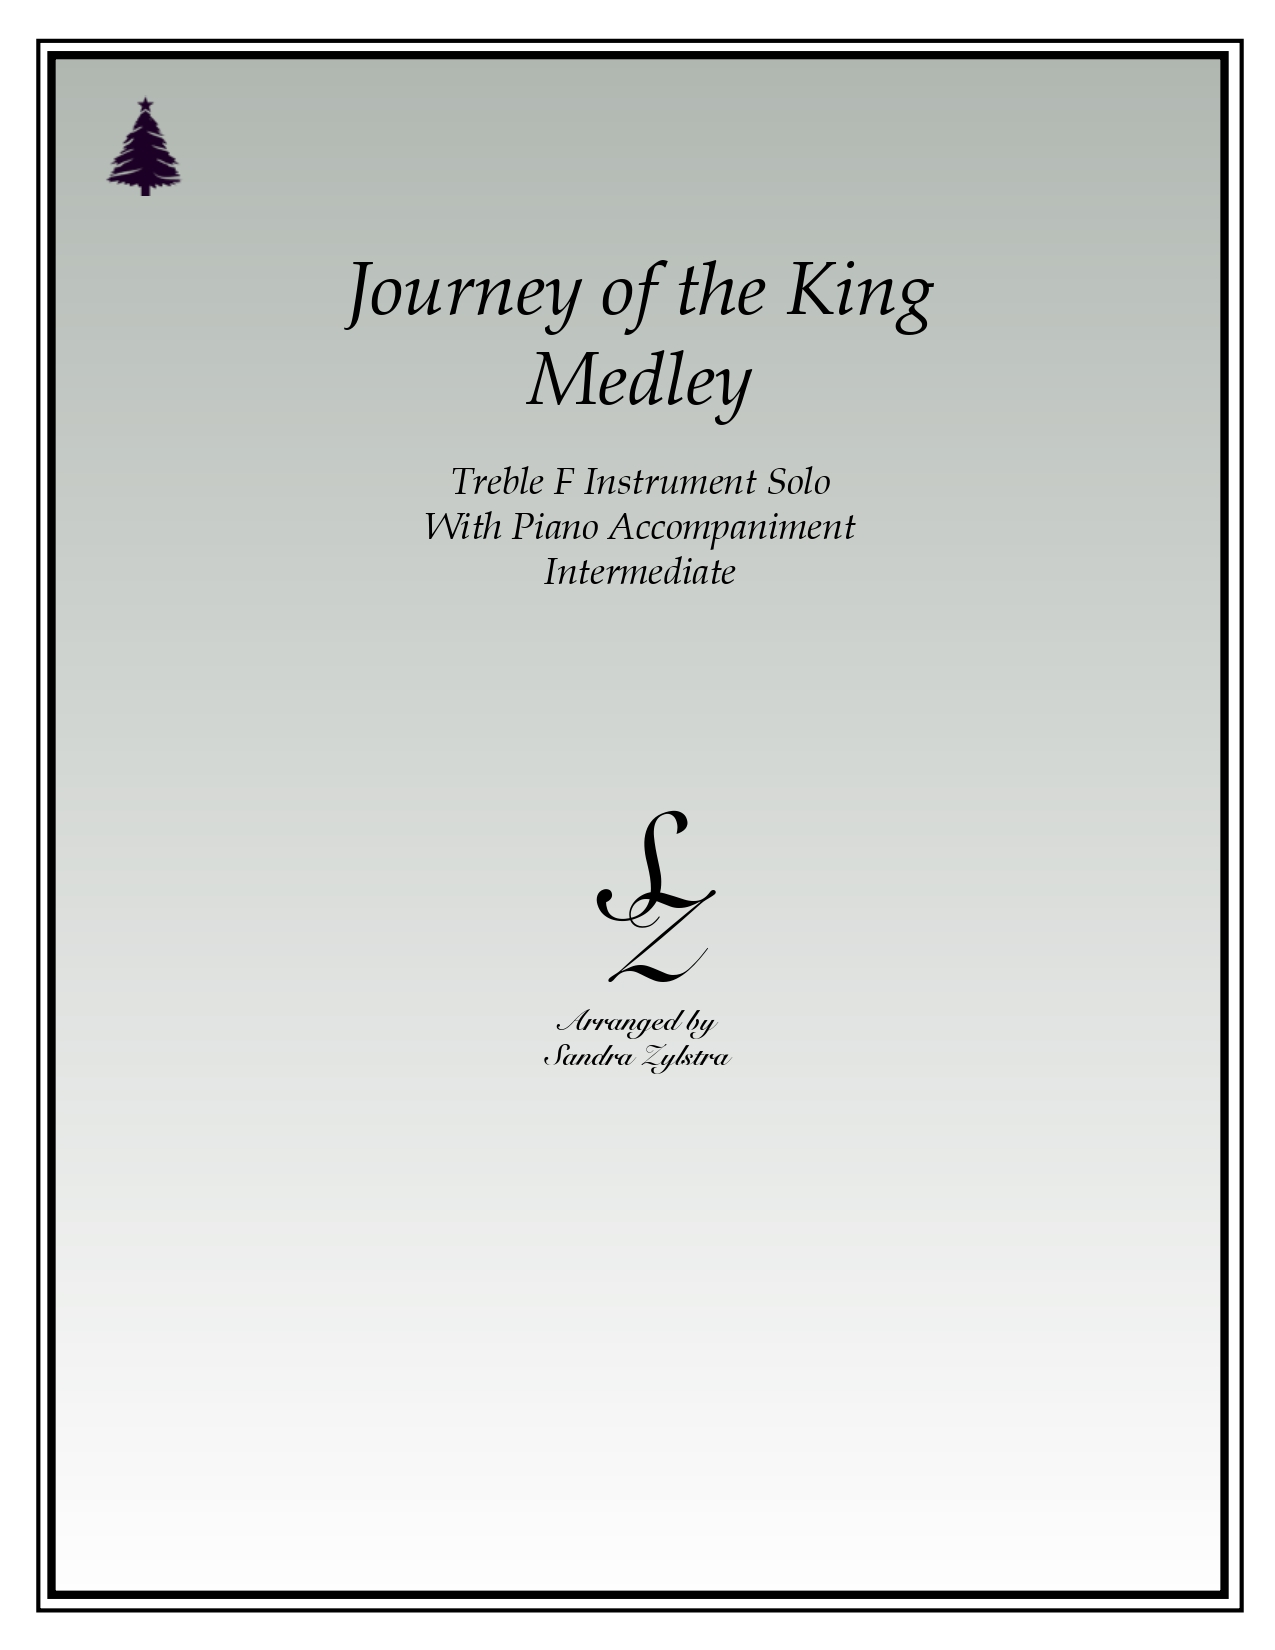 Journey Of The King Medley F instrument solo part cover page 00011